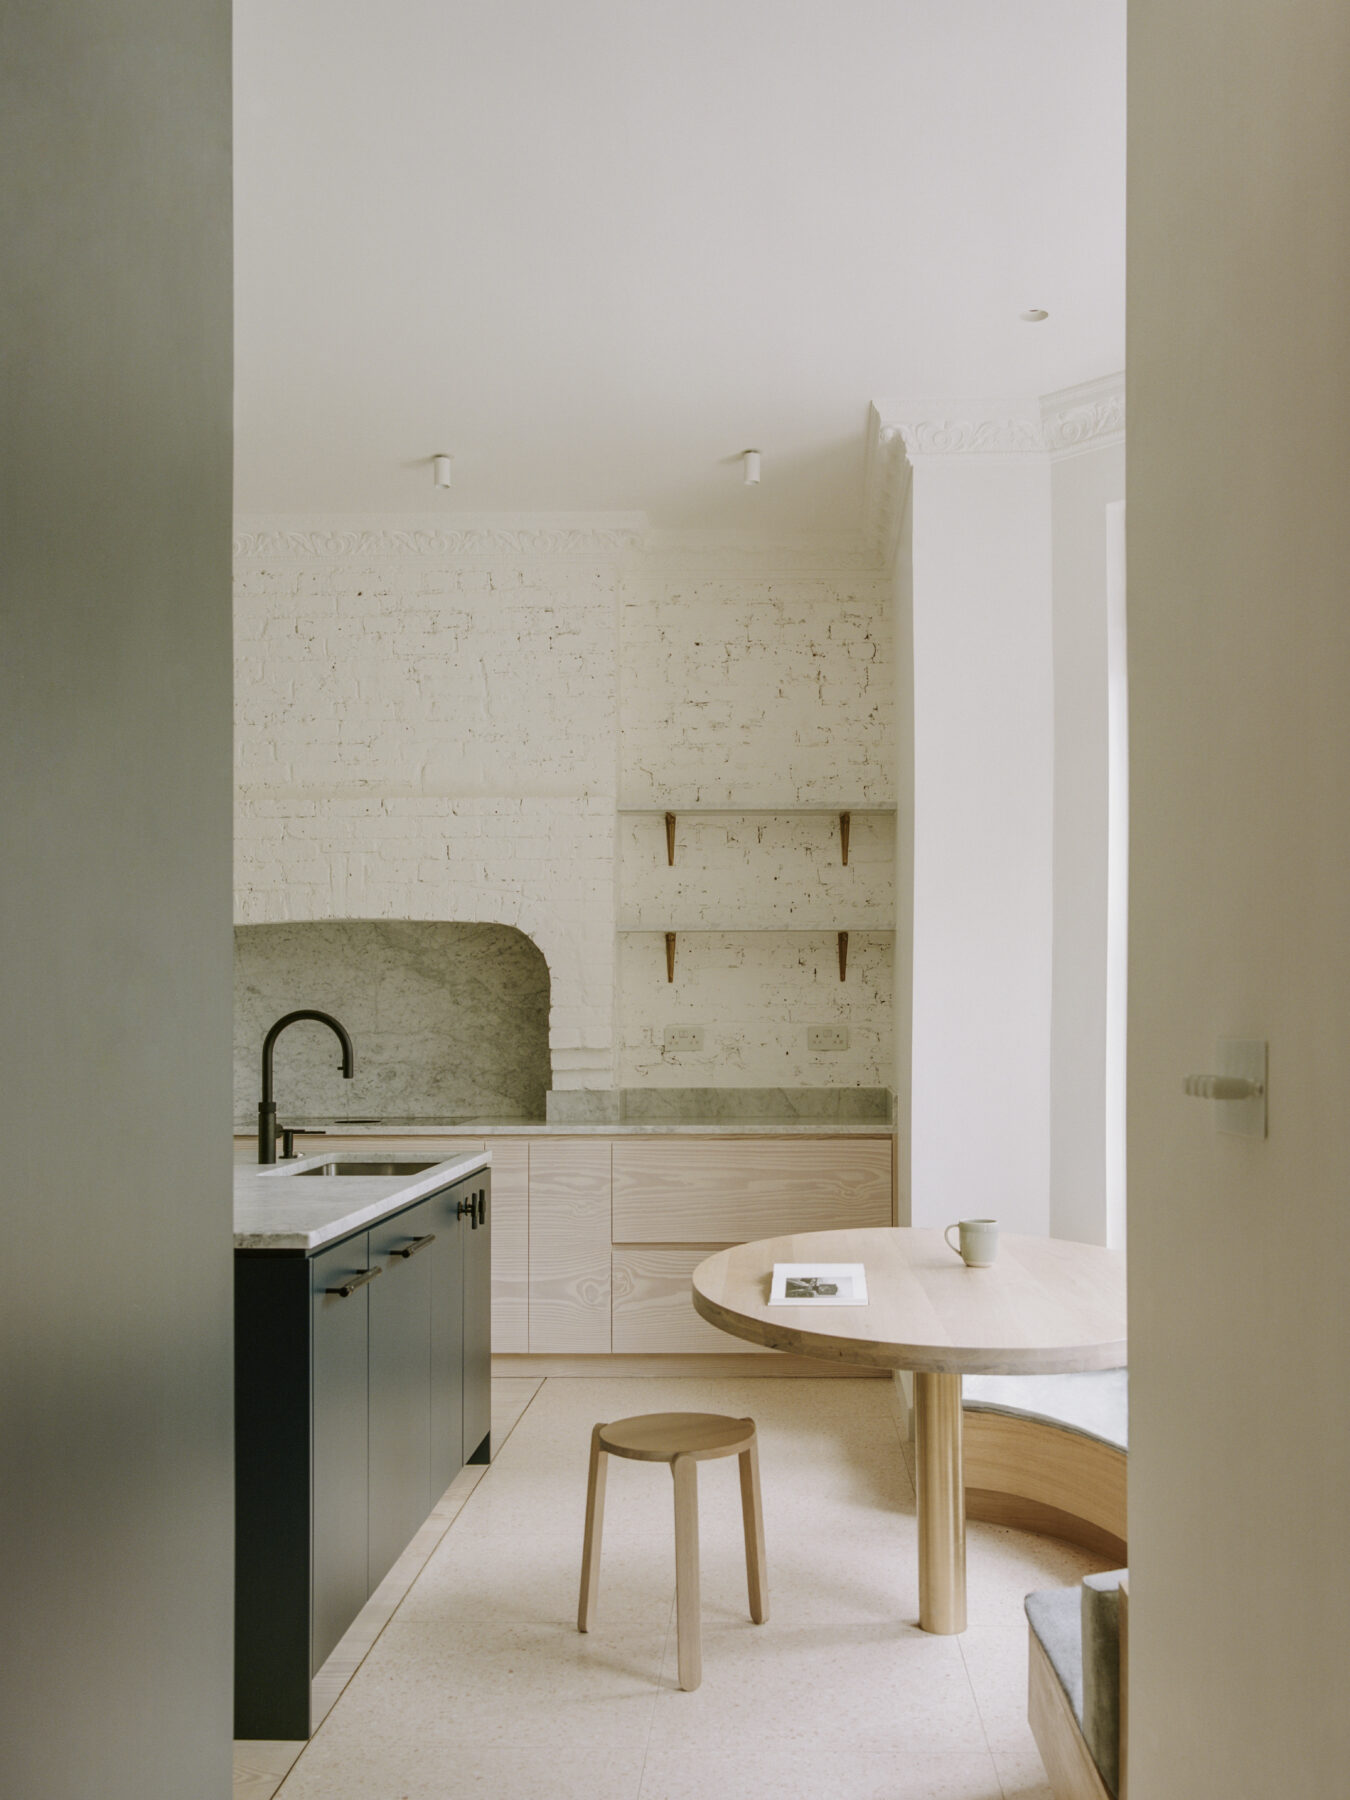 Archisearch Steele’s Road House - Transformation of a Victorian-era terrace house in West London by Neiheiser Argyros